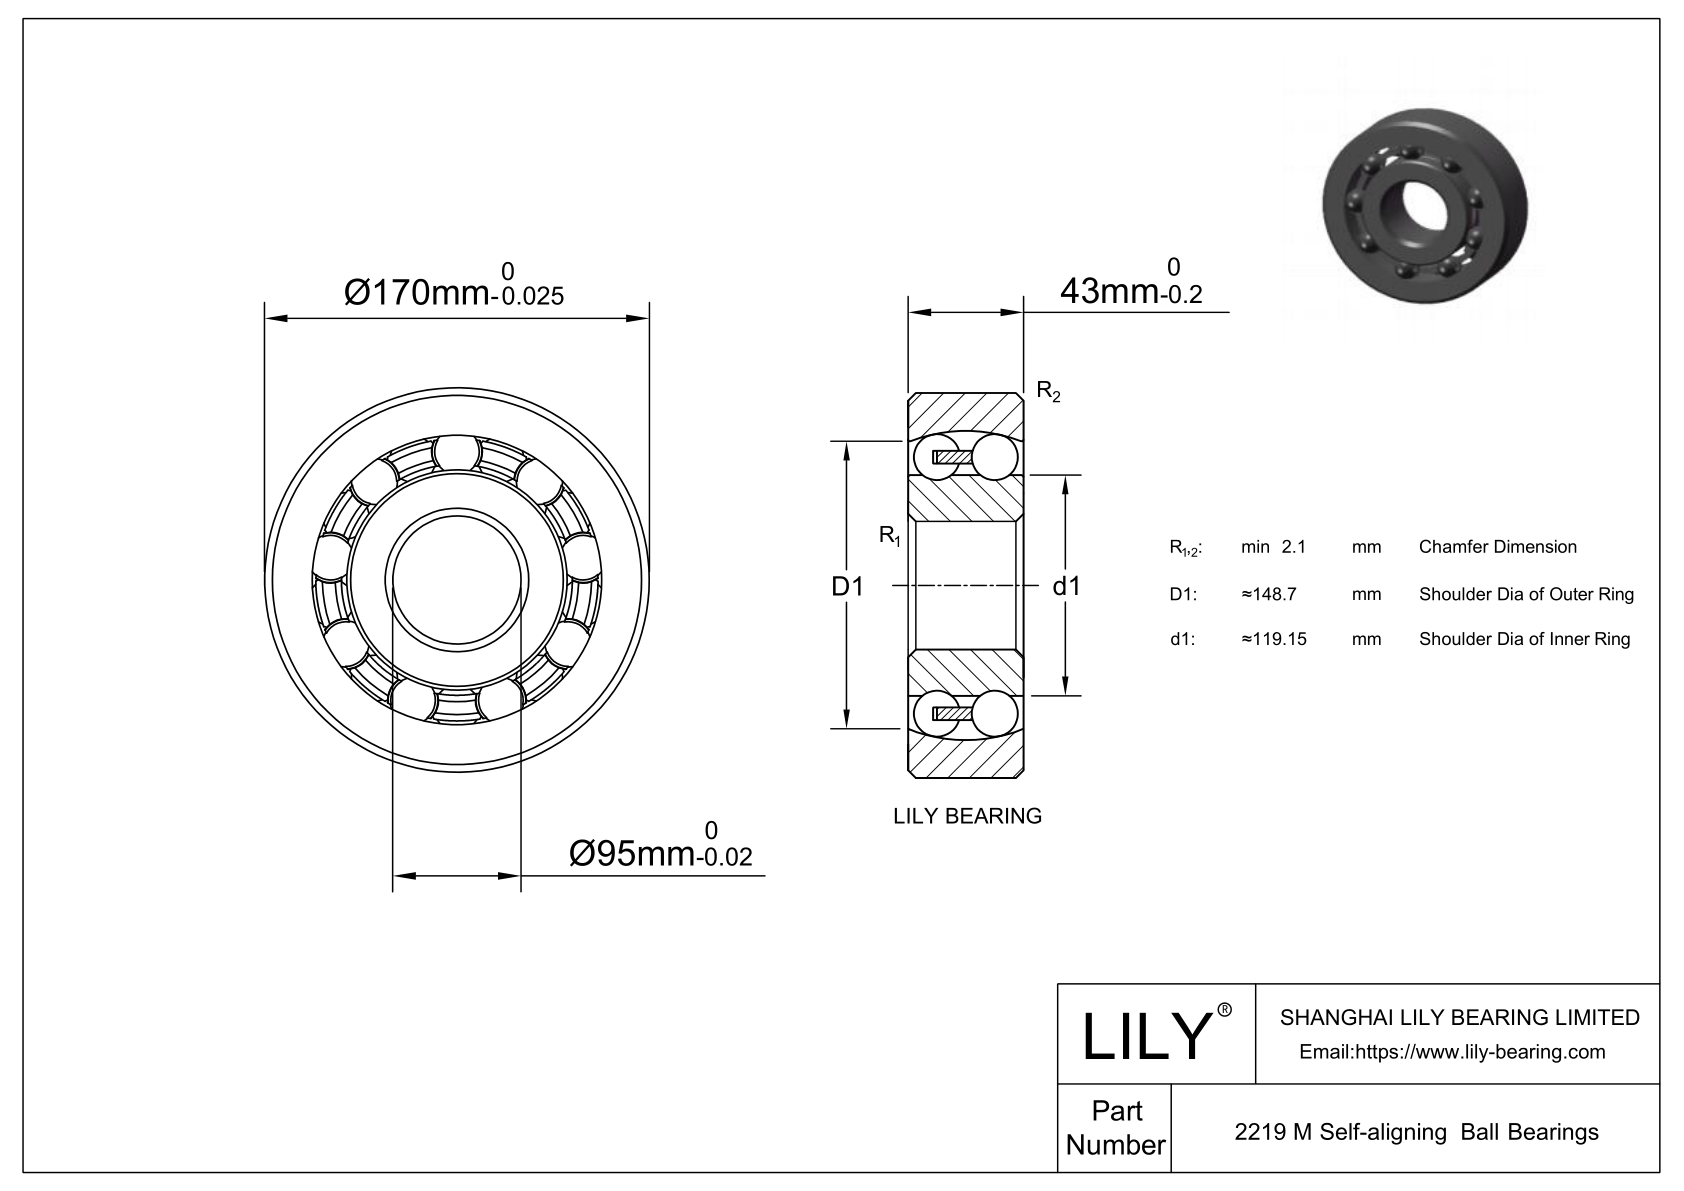 S2219 M Stainless Steel Self Aligning Ball Bearings cad drawing